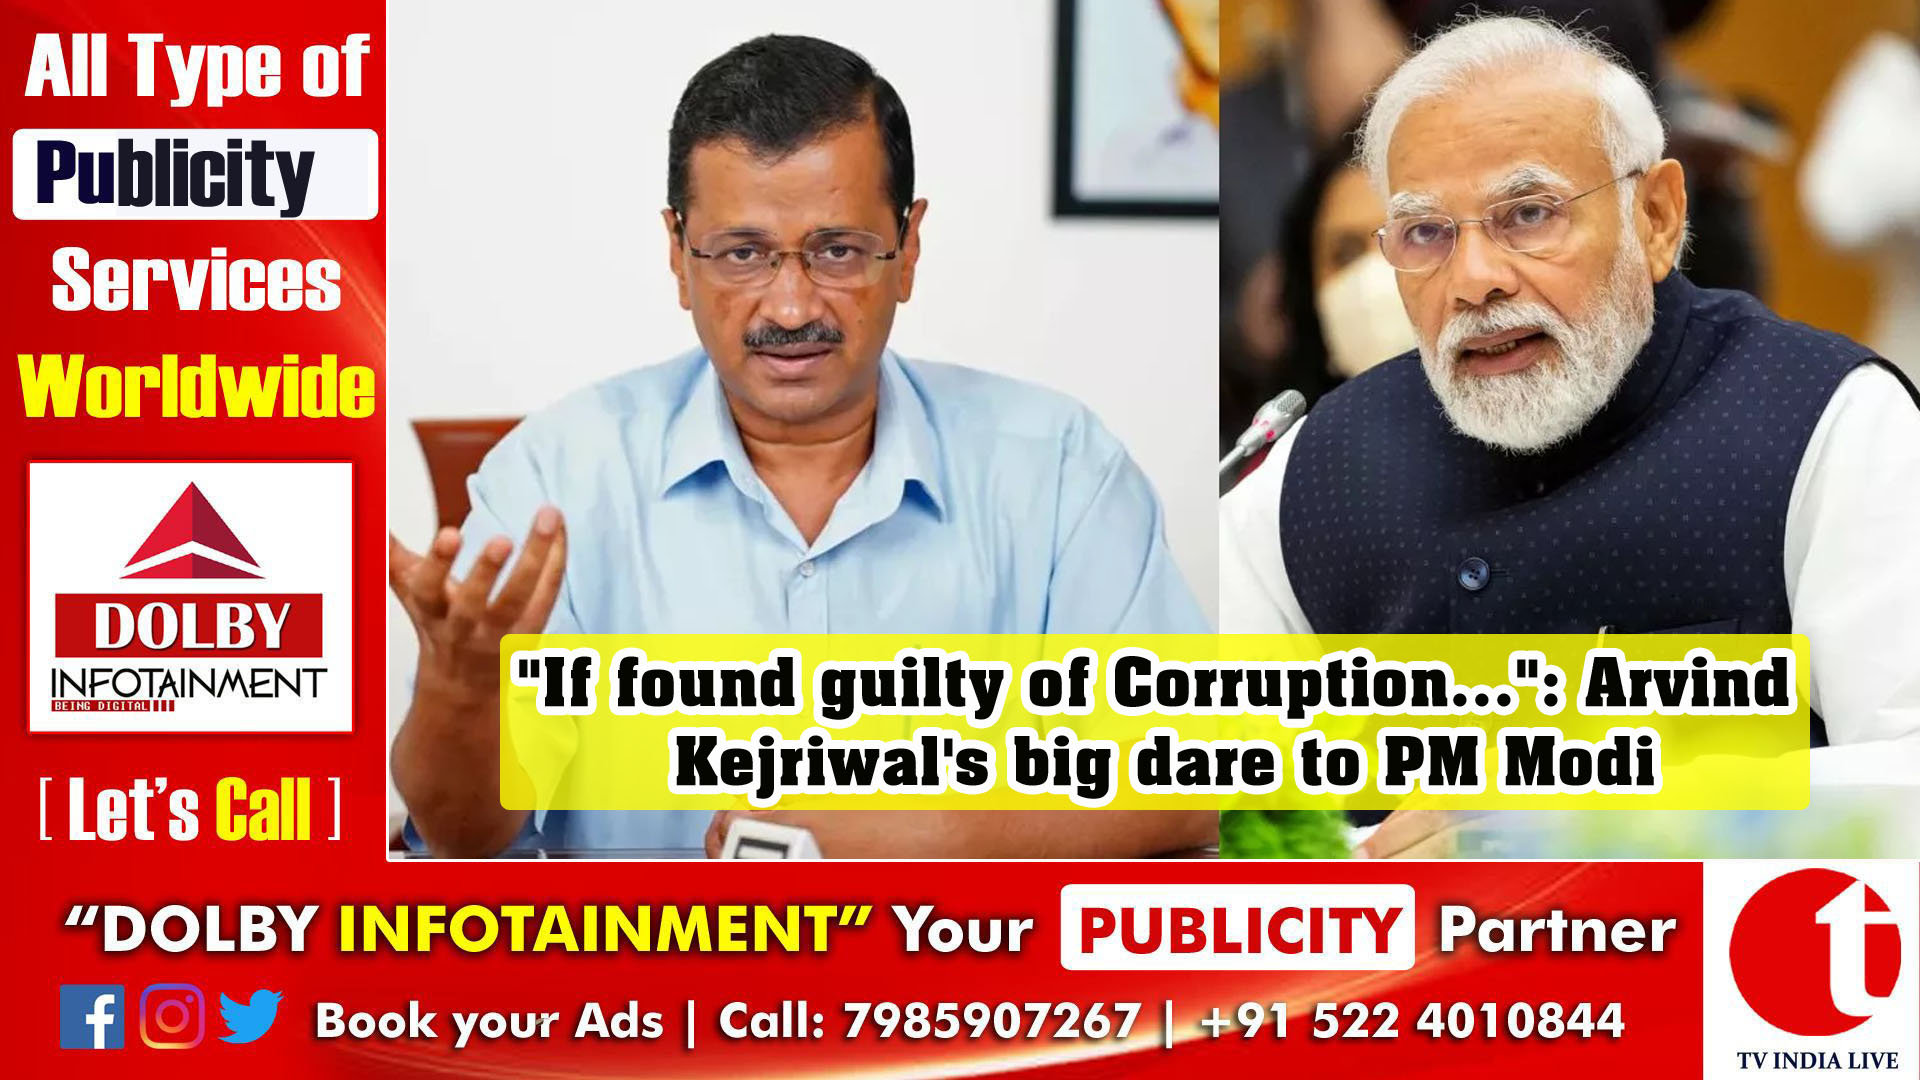 "If found guilty of Corruption...": Arvind Kejriwal's big dare to PM Modi